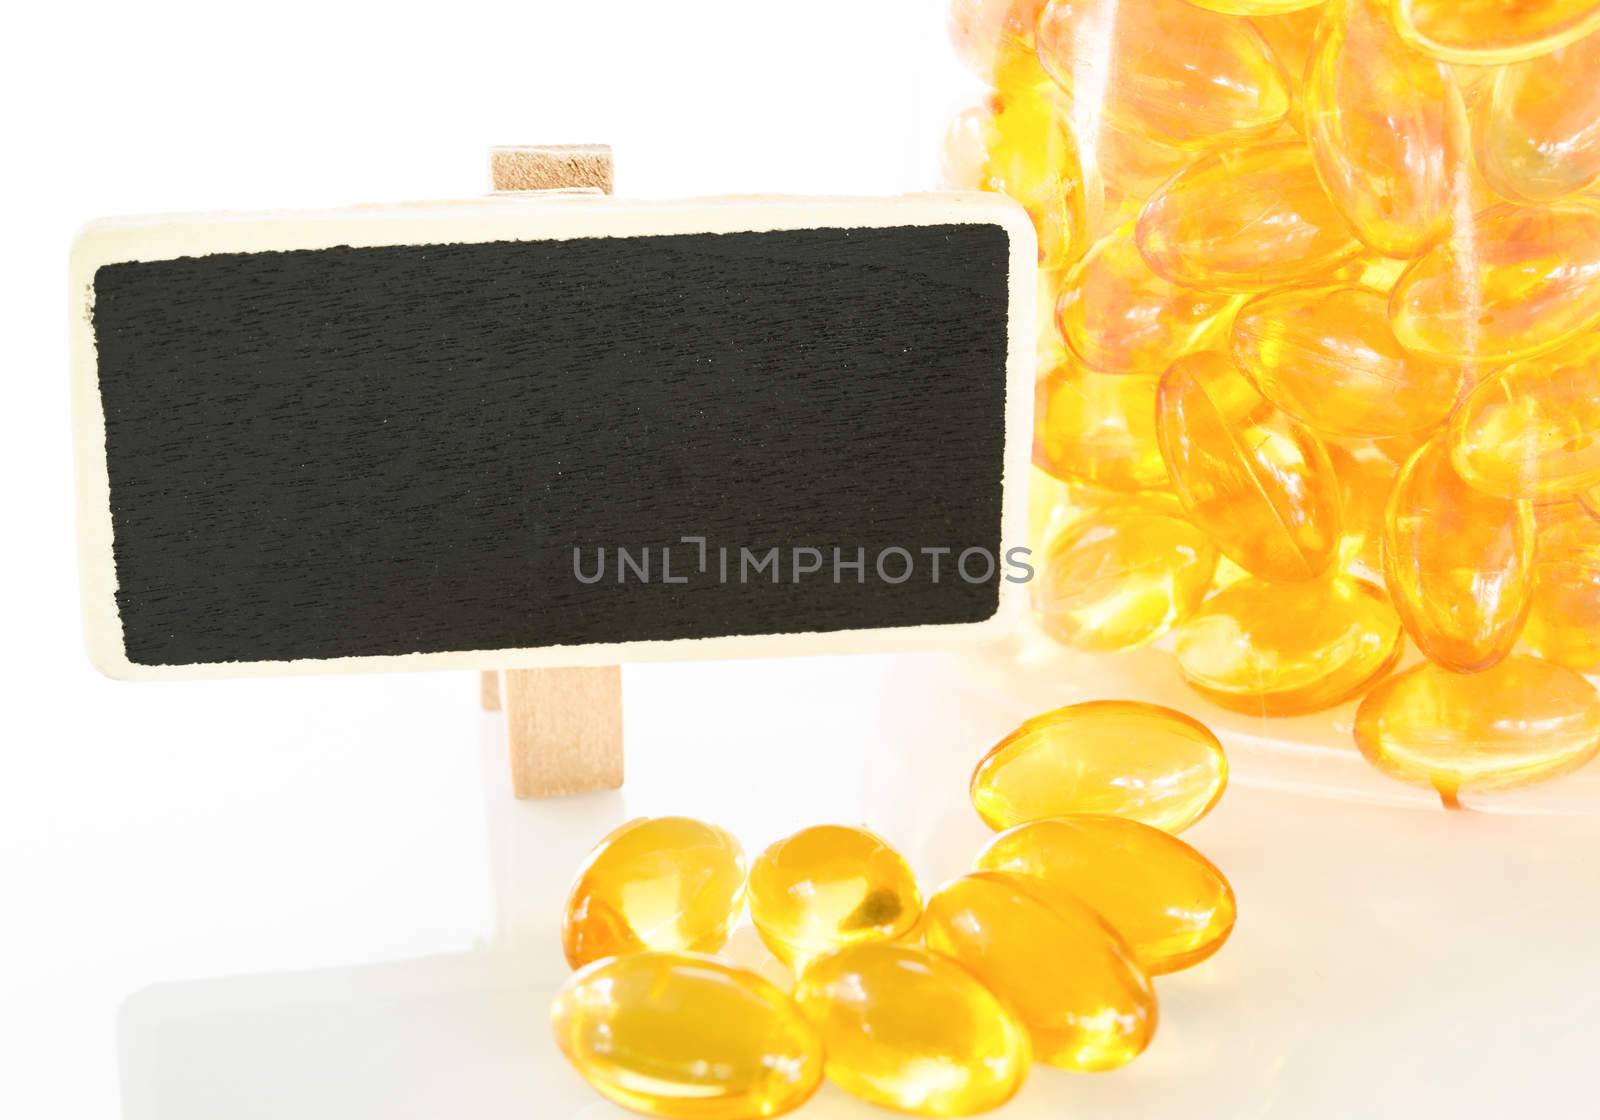 Fish oil capsules on white background and blank wooden tag.